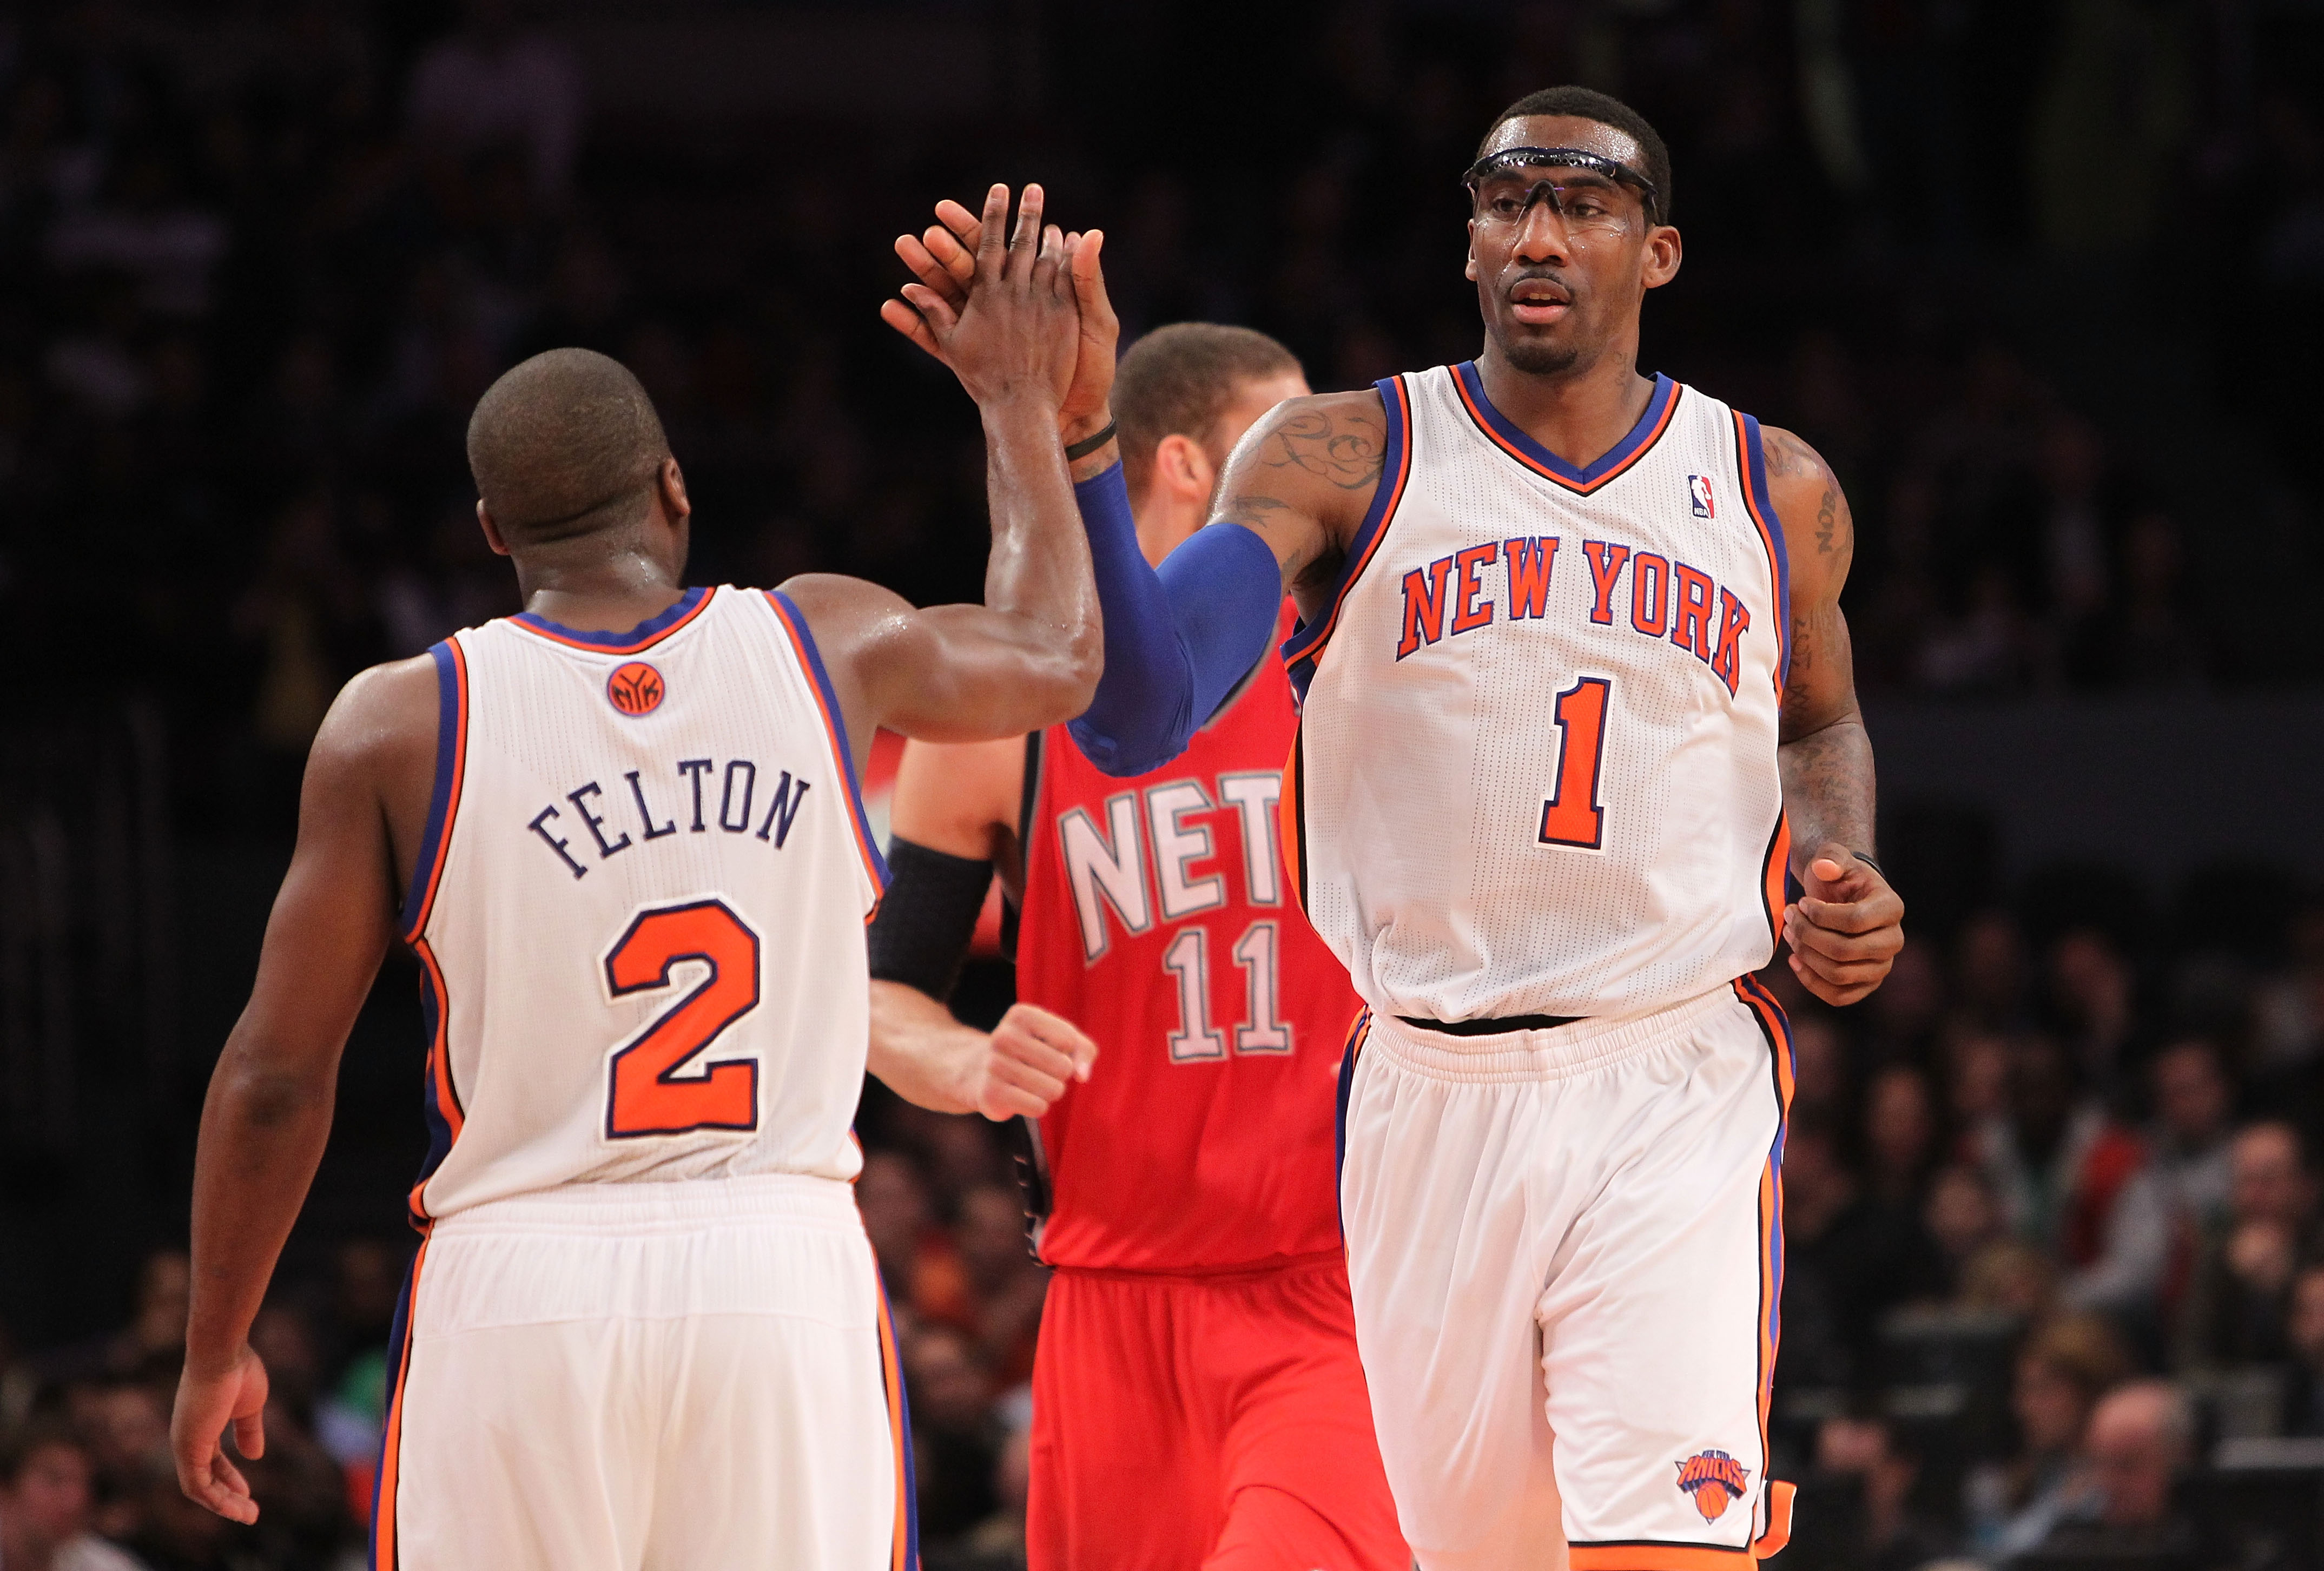 NEW YORK, NY - NOVEMBER 30:  Amar'e Stoudemire #1 of the New York Knicks high fives teammate Raymond Felton #2l against the New Jersey Nets on November 30, 2010 at Madison Square Garden in New York City. NOTE TO USER: User expressly acknowledges and agree